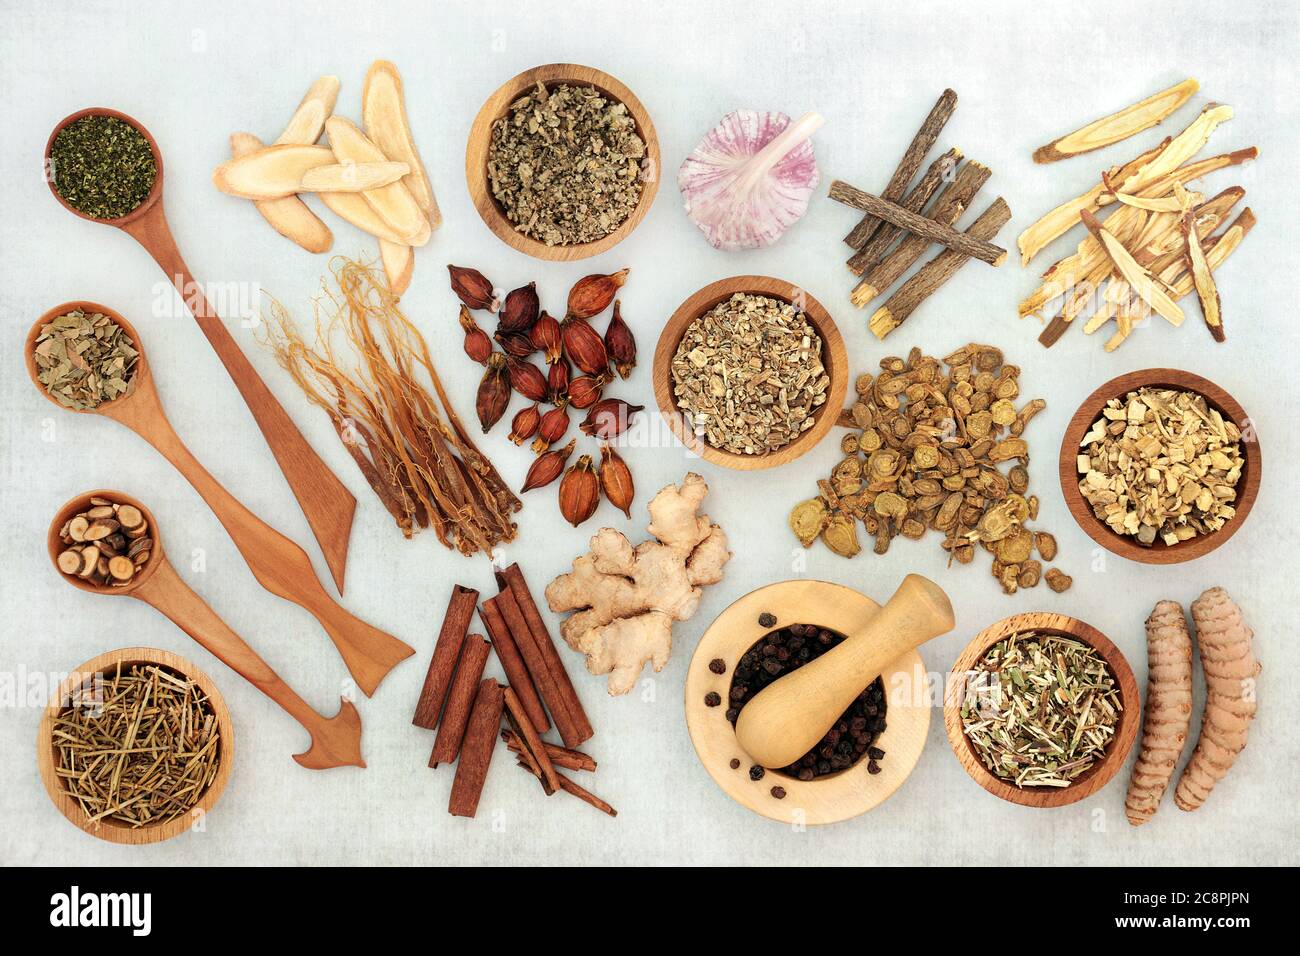 Herb and spice collection used in natural and chinese herbal medicine to relieve asthma and to treat COPD and other respiratory diseases. Flat lay. Stock Photo